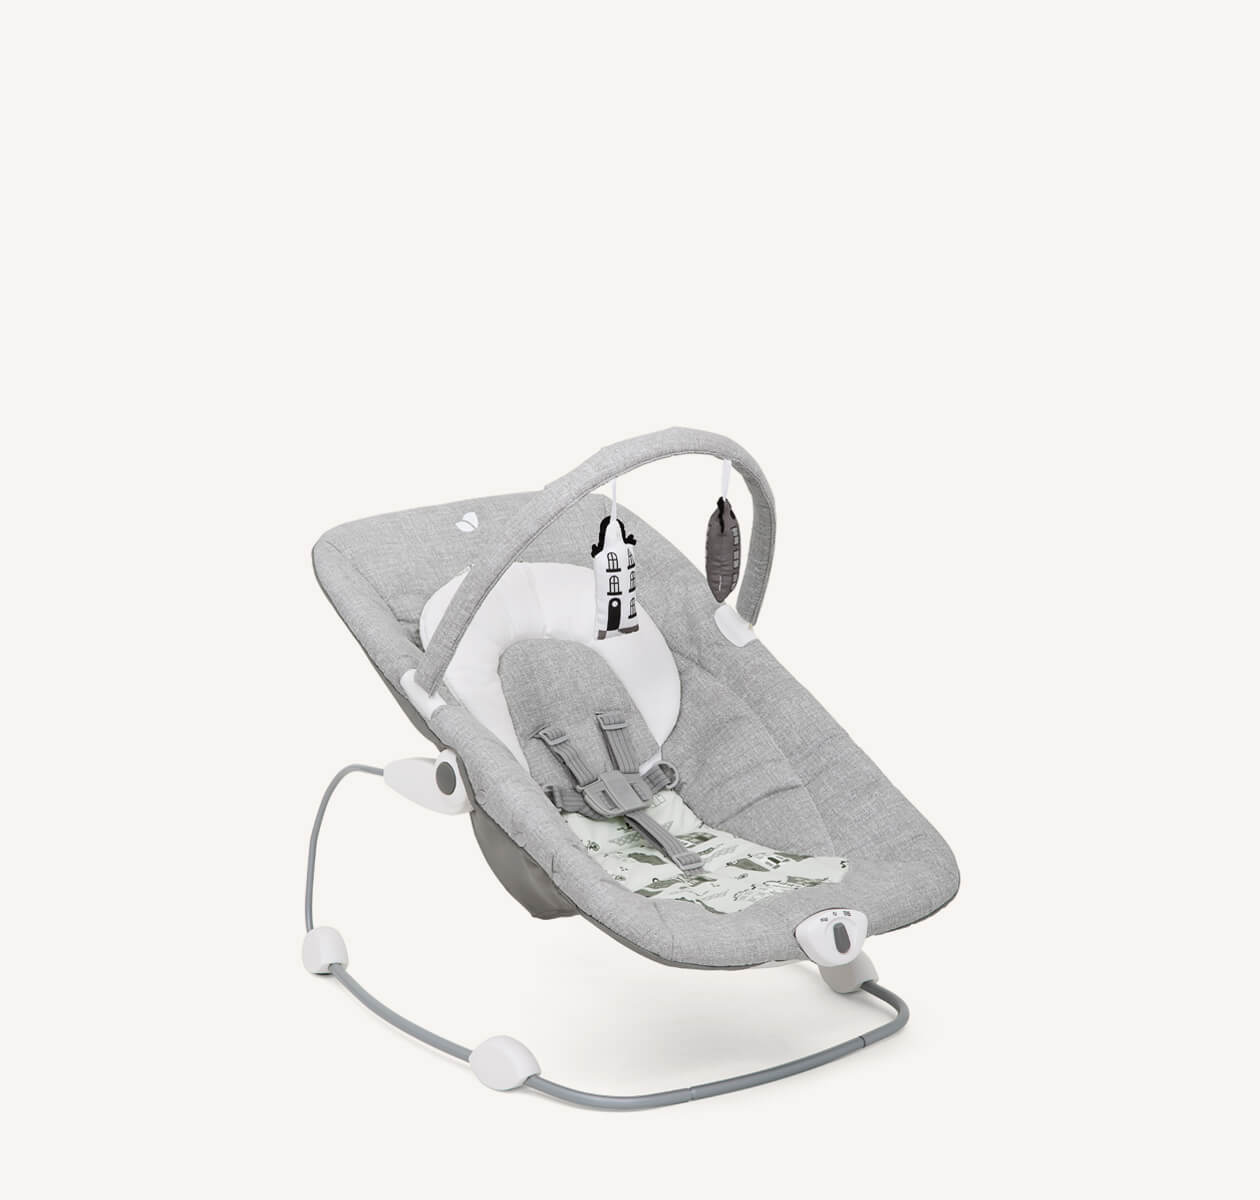  Joie light gray wish bouncer at a right angle.